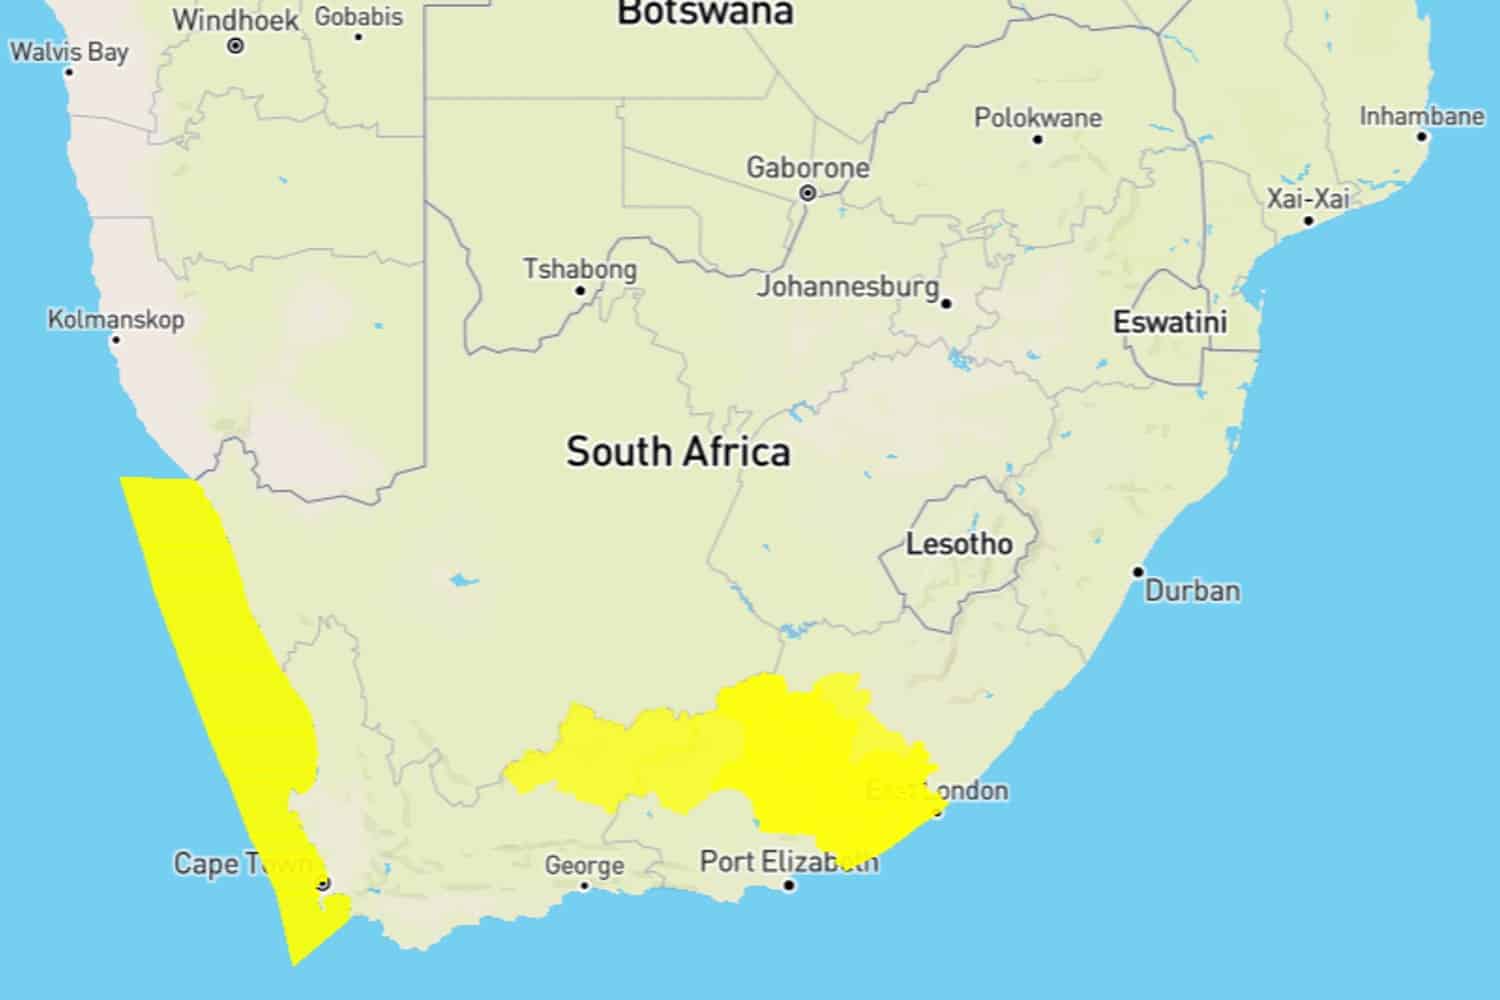 [WEATHER WARNING] Disruptive rain for Western Cape